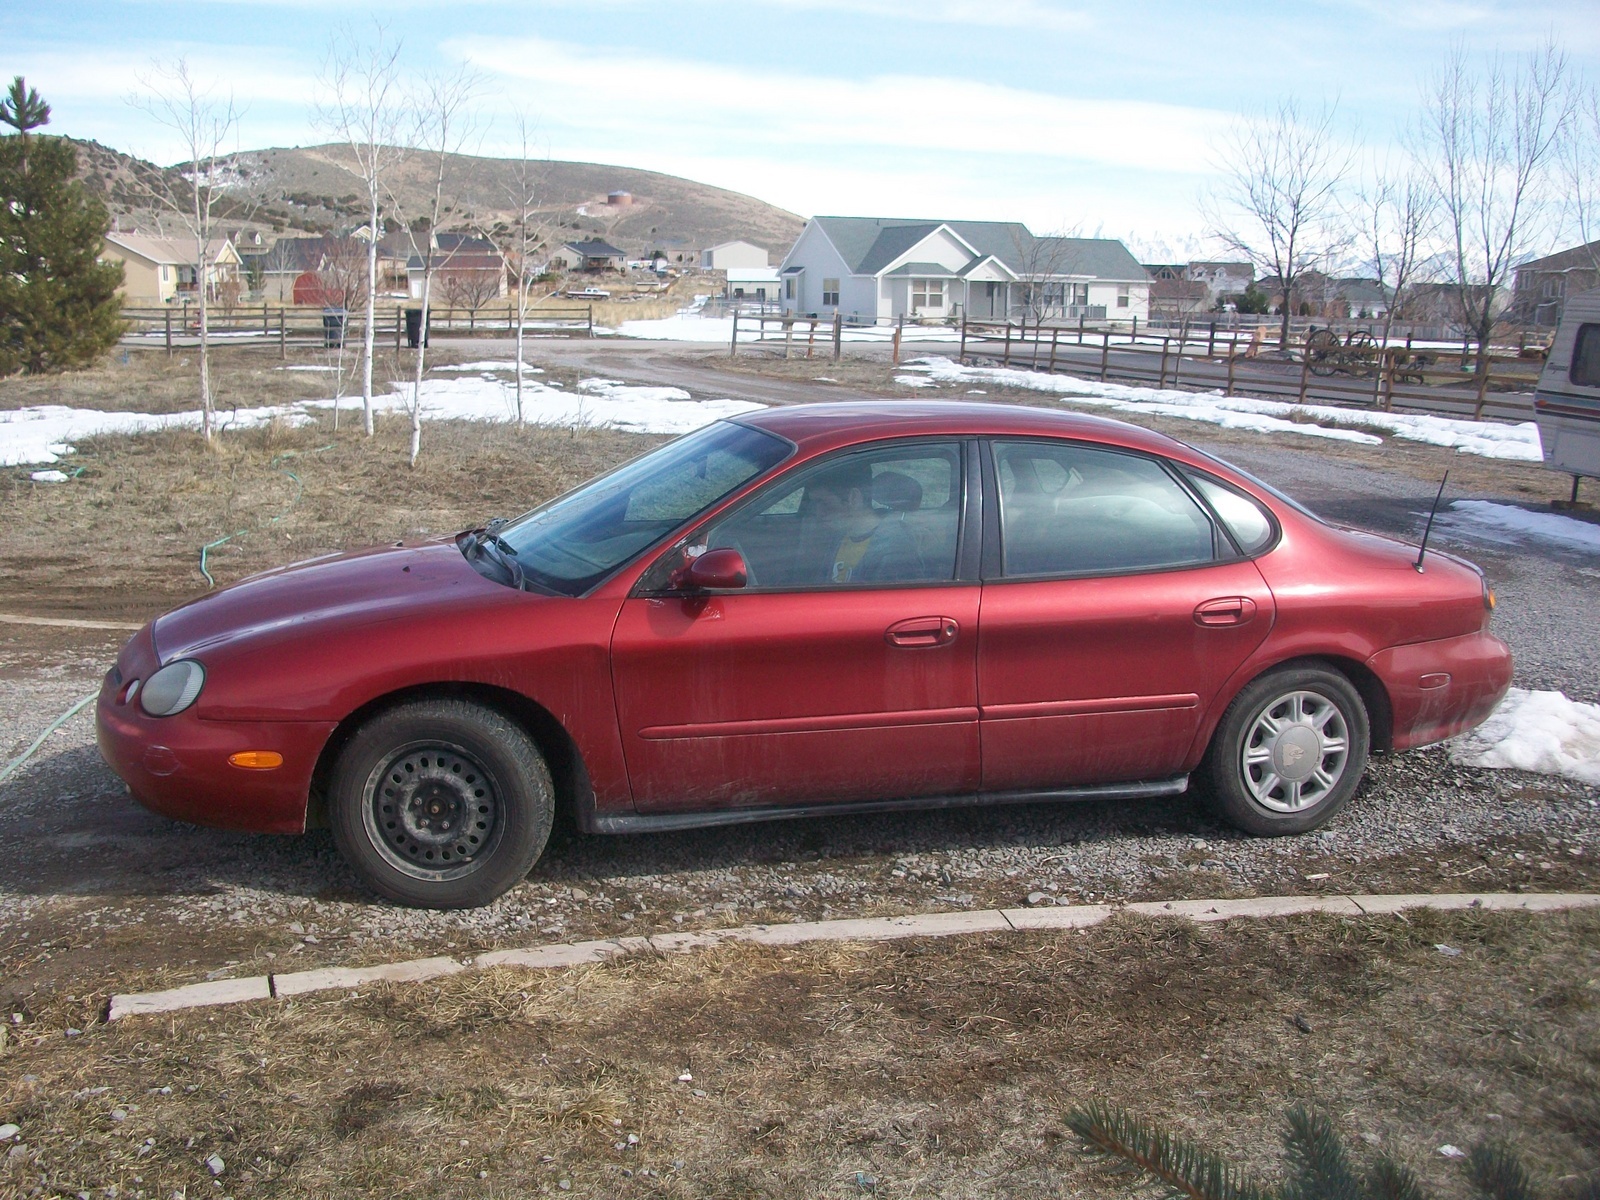 Ford Taurus Questions - My son has a 1997 Ford Taurus. We cannot get the  check engine light to... - CarGurus